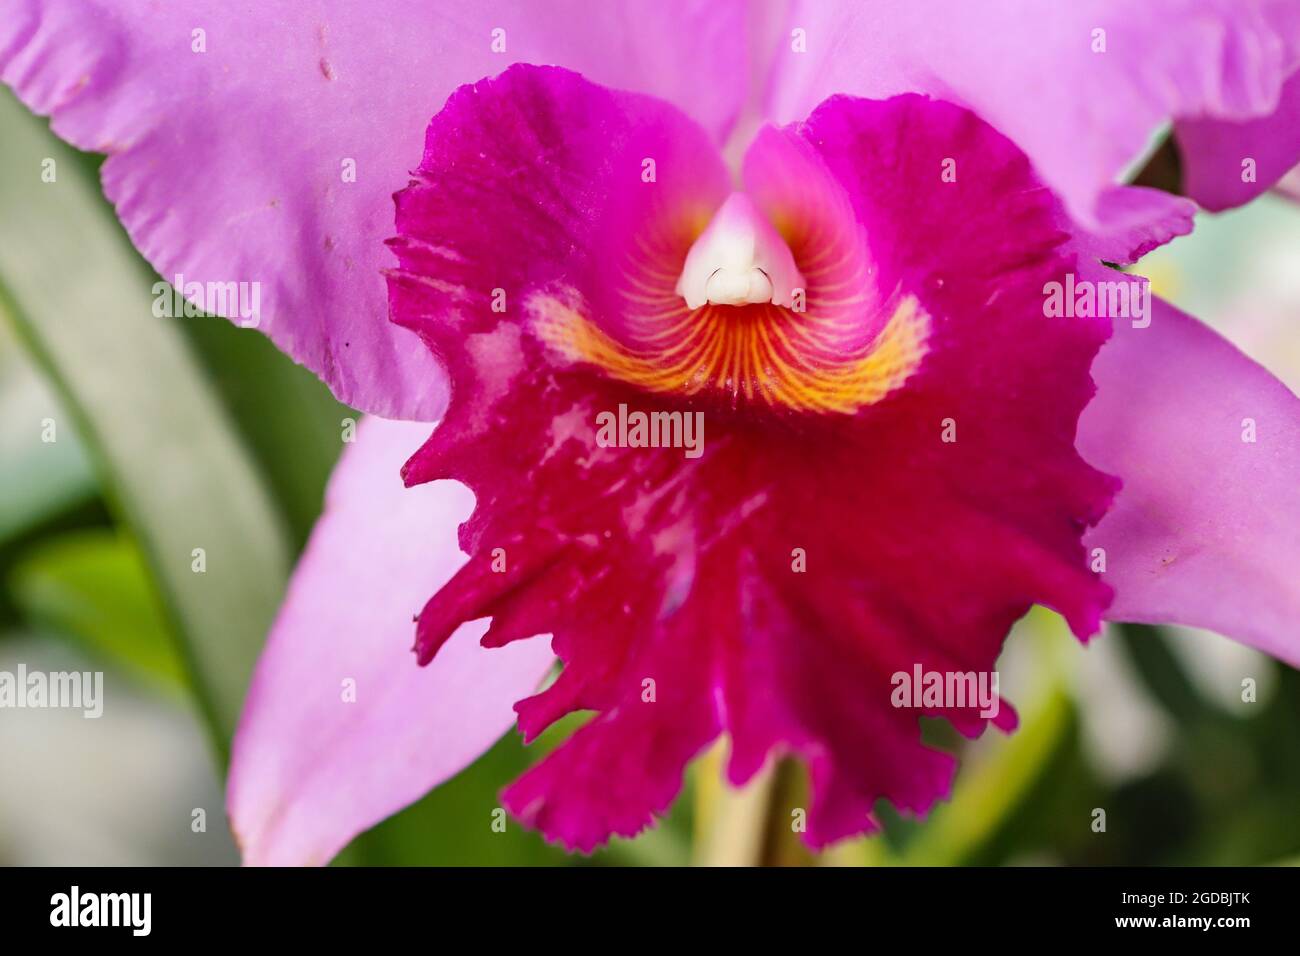 Crimson Cattleya orchid flower with center focus and rest of image blurred Stock Photo